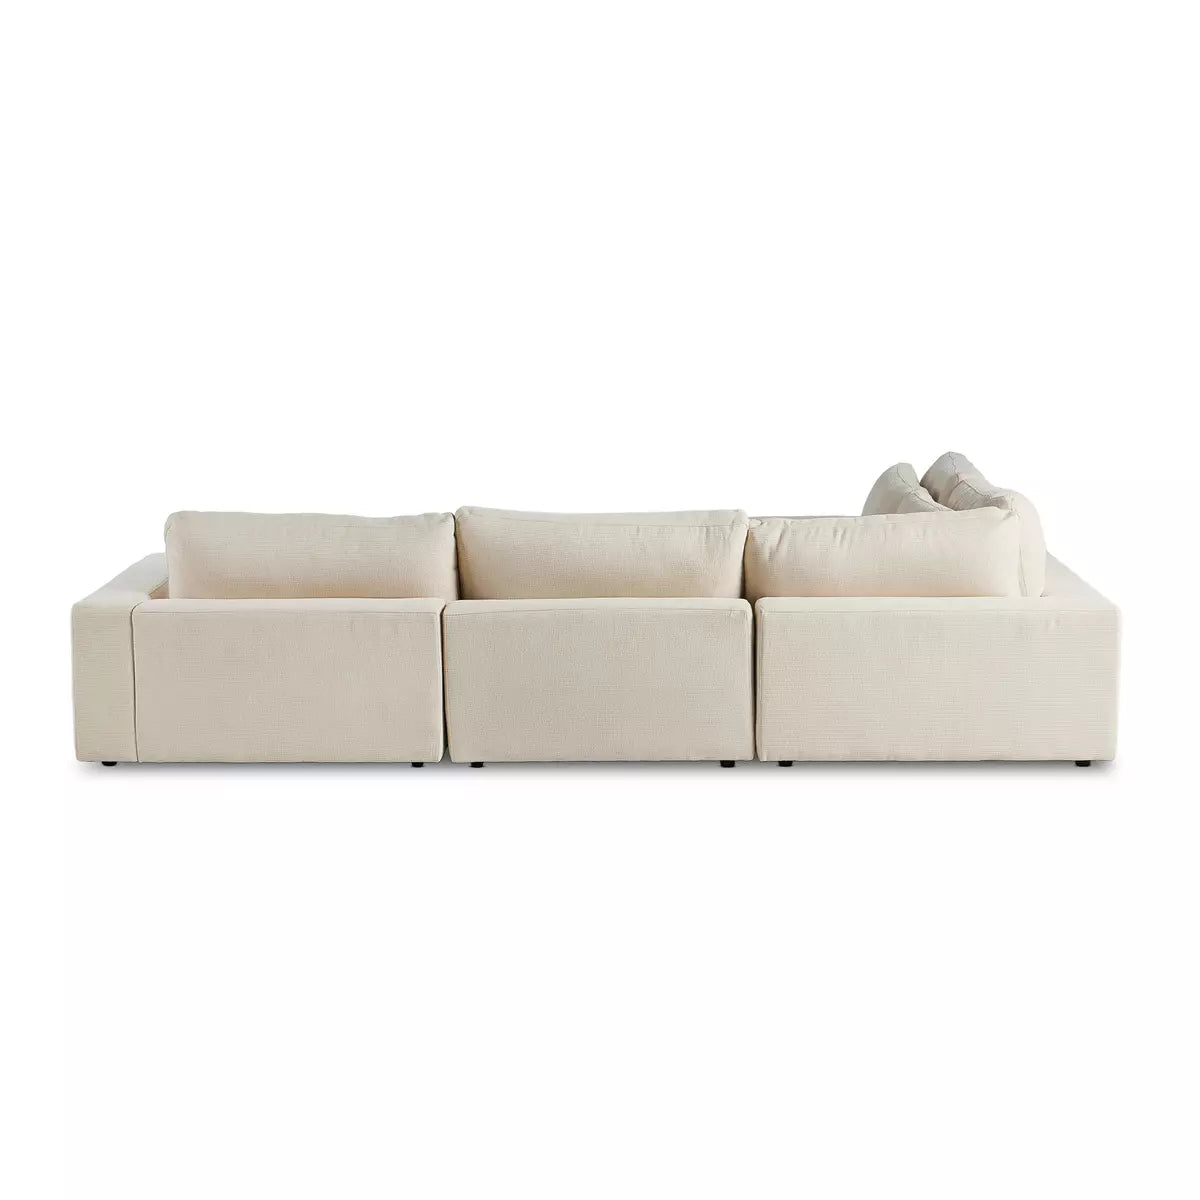 Bloor 4-pc Sectional W/ Ottoman